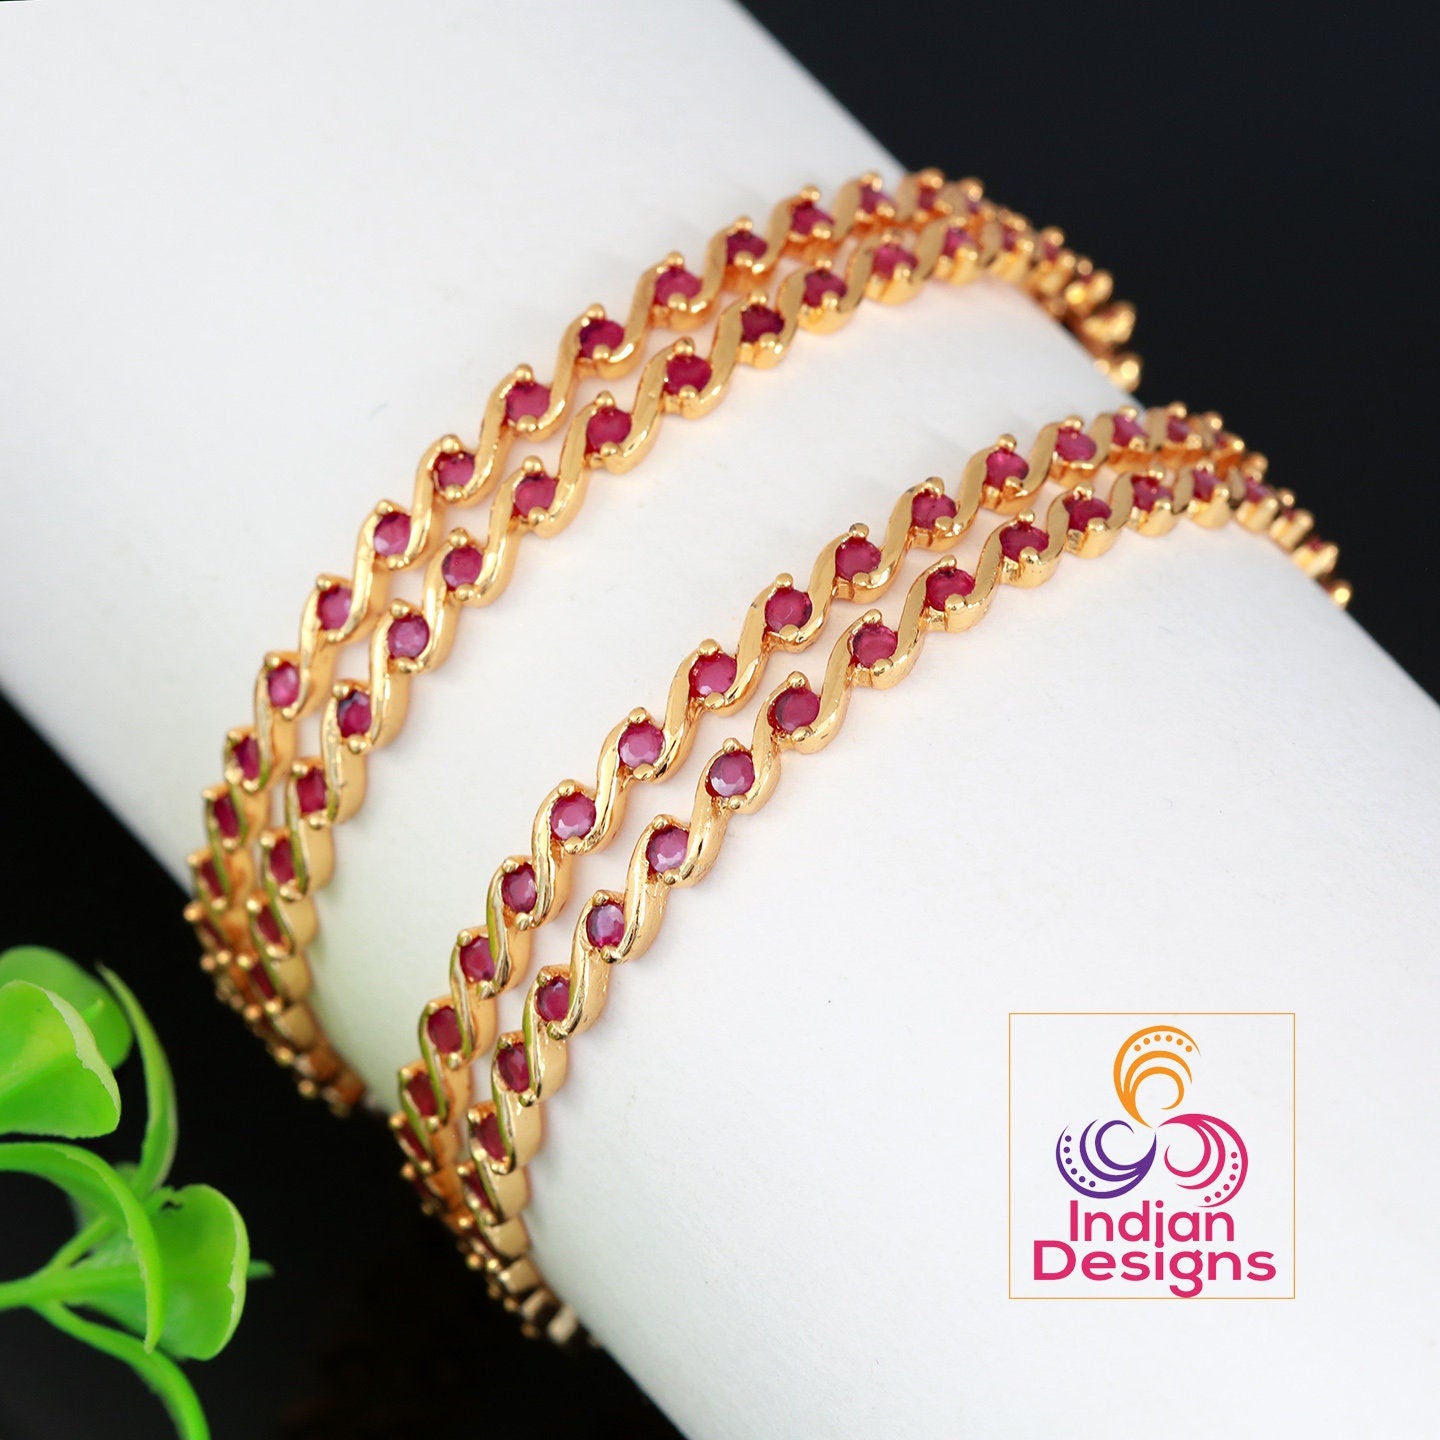 Minimalist Gold bangles design set of 4 | Bangle Size 2.6 One gram gold Indian bangles with ruby and emerald | American diamond bangles set